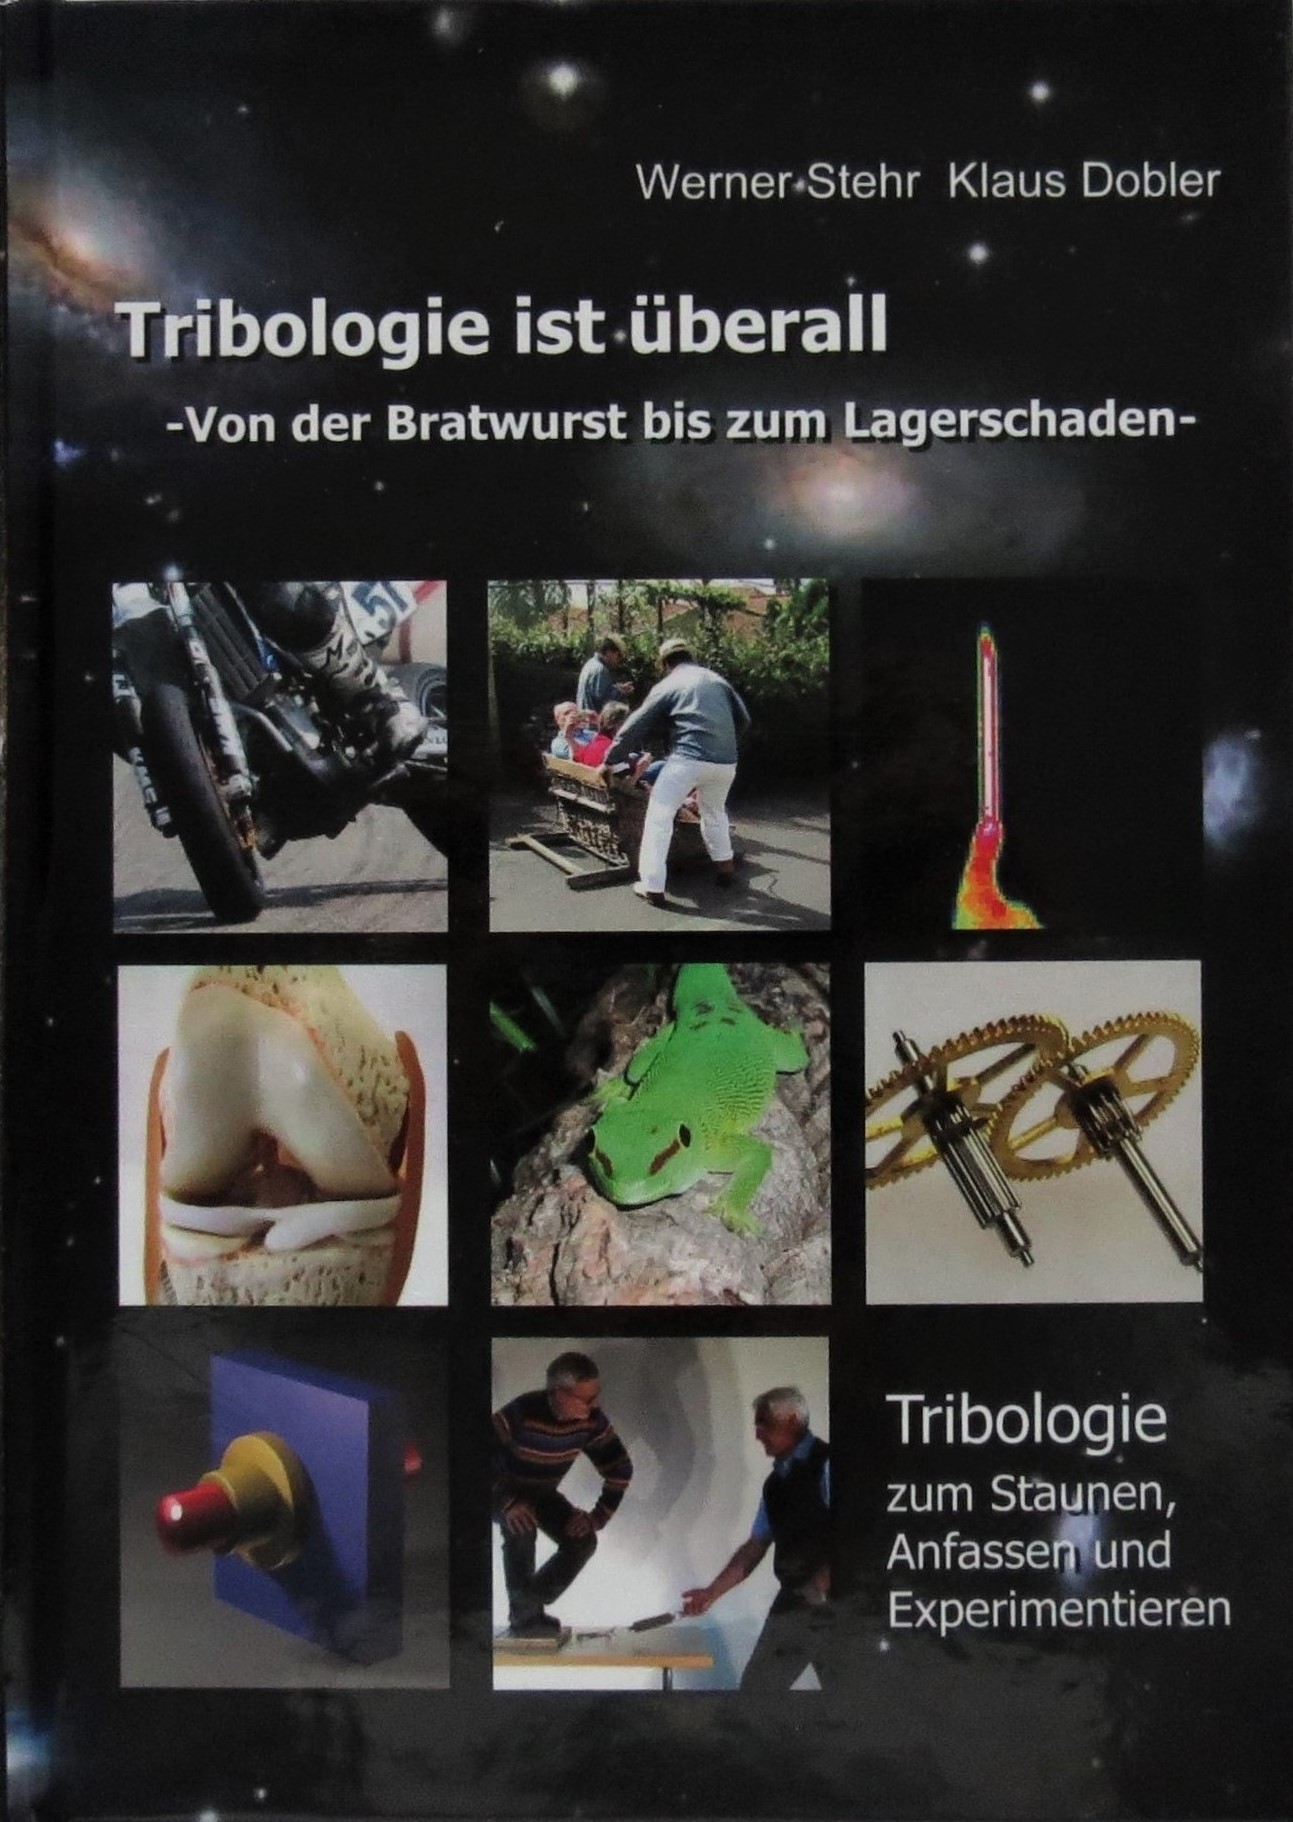 Book "Tribology is everywhere"